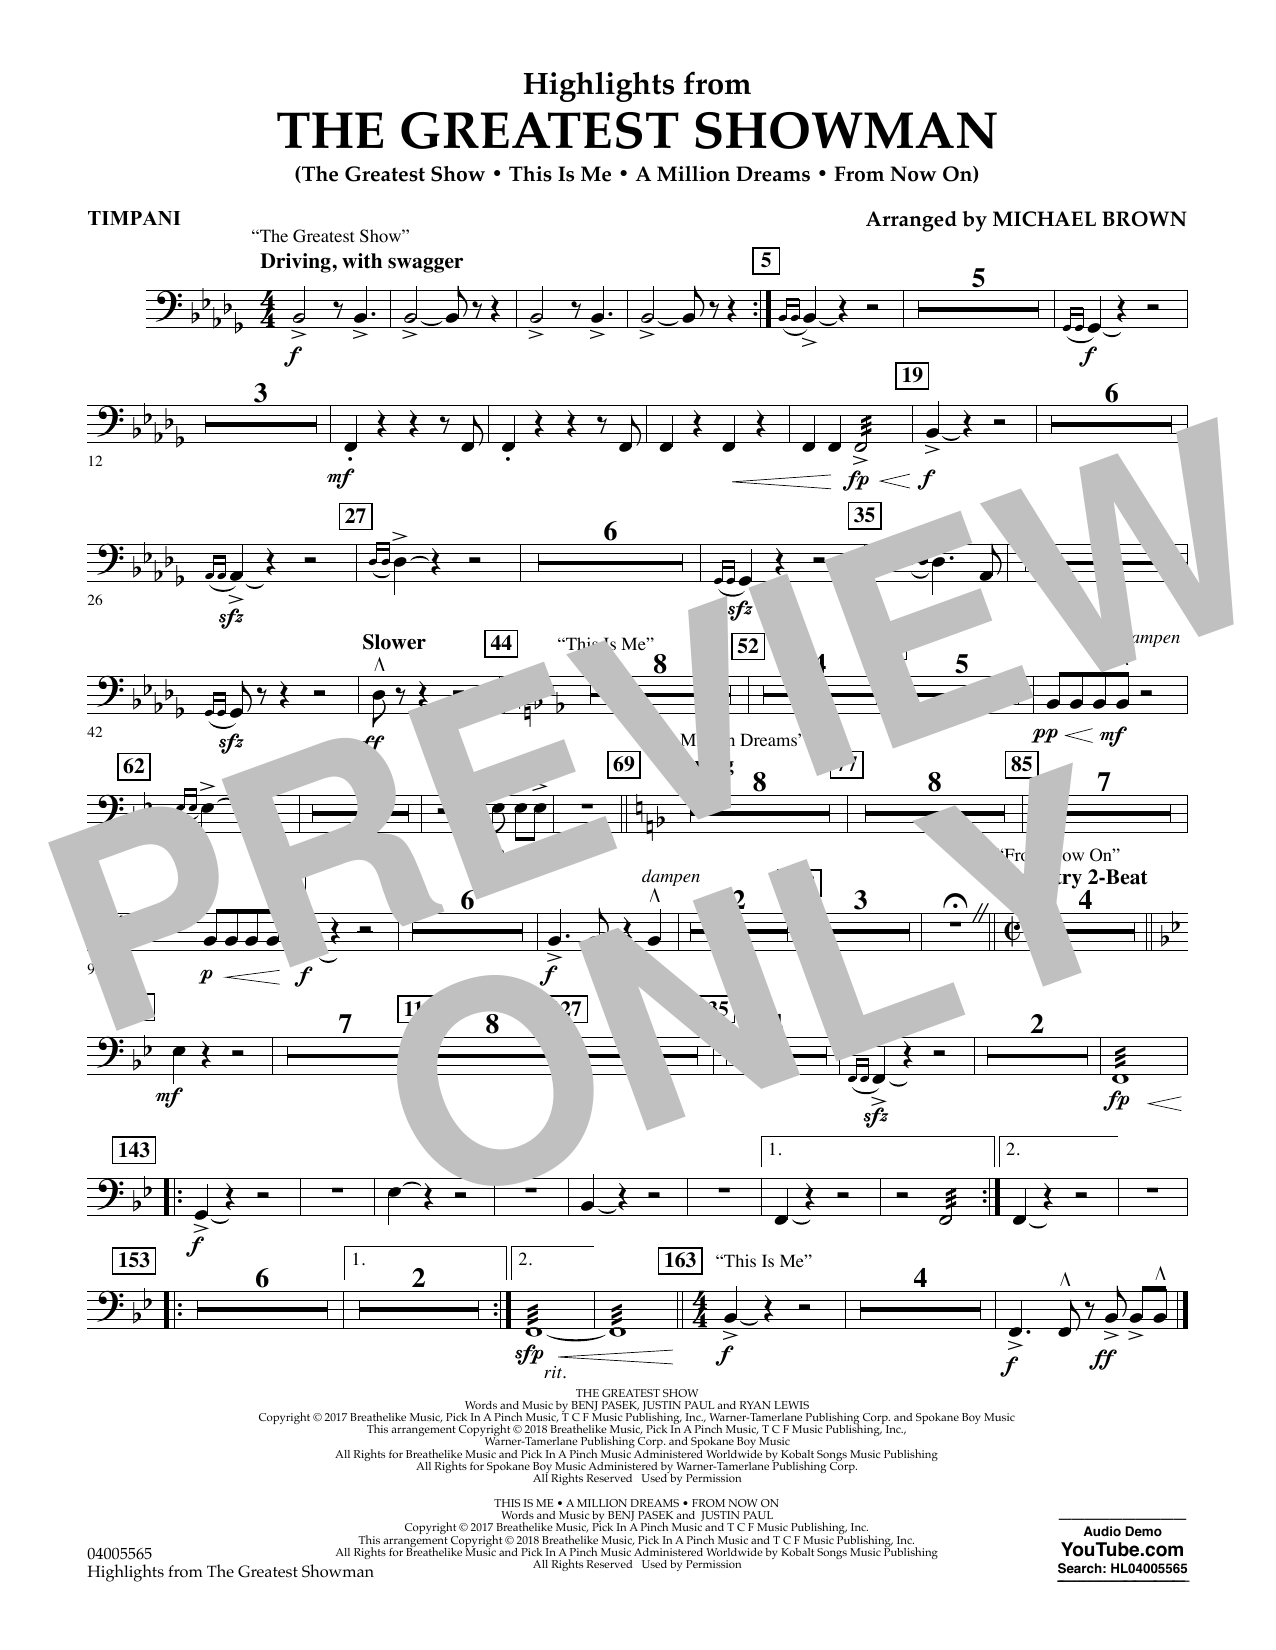 Michael Brown Highlights from The Greatest Showman - Timpani sheet music preview music notes and score for Concert Band including 1 page(s)